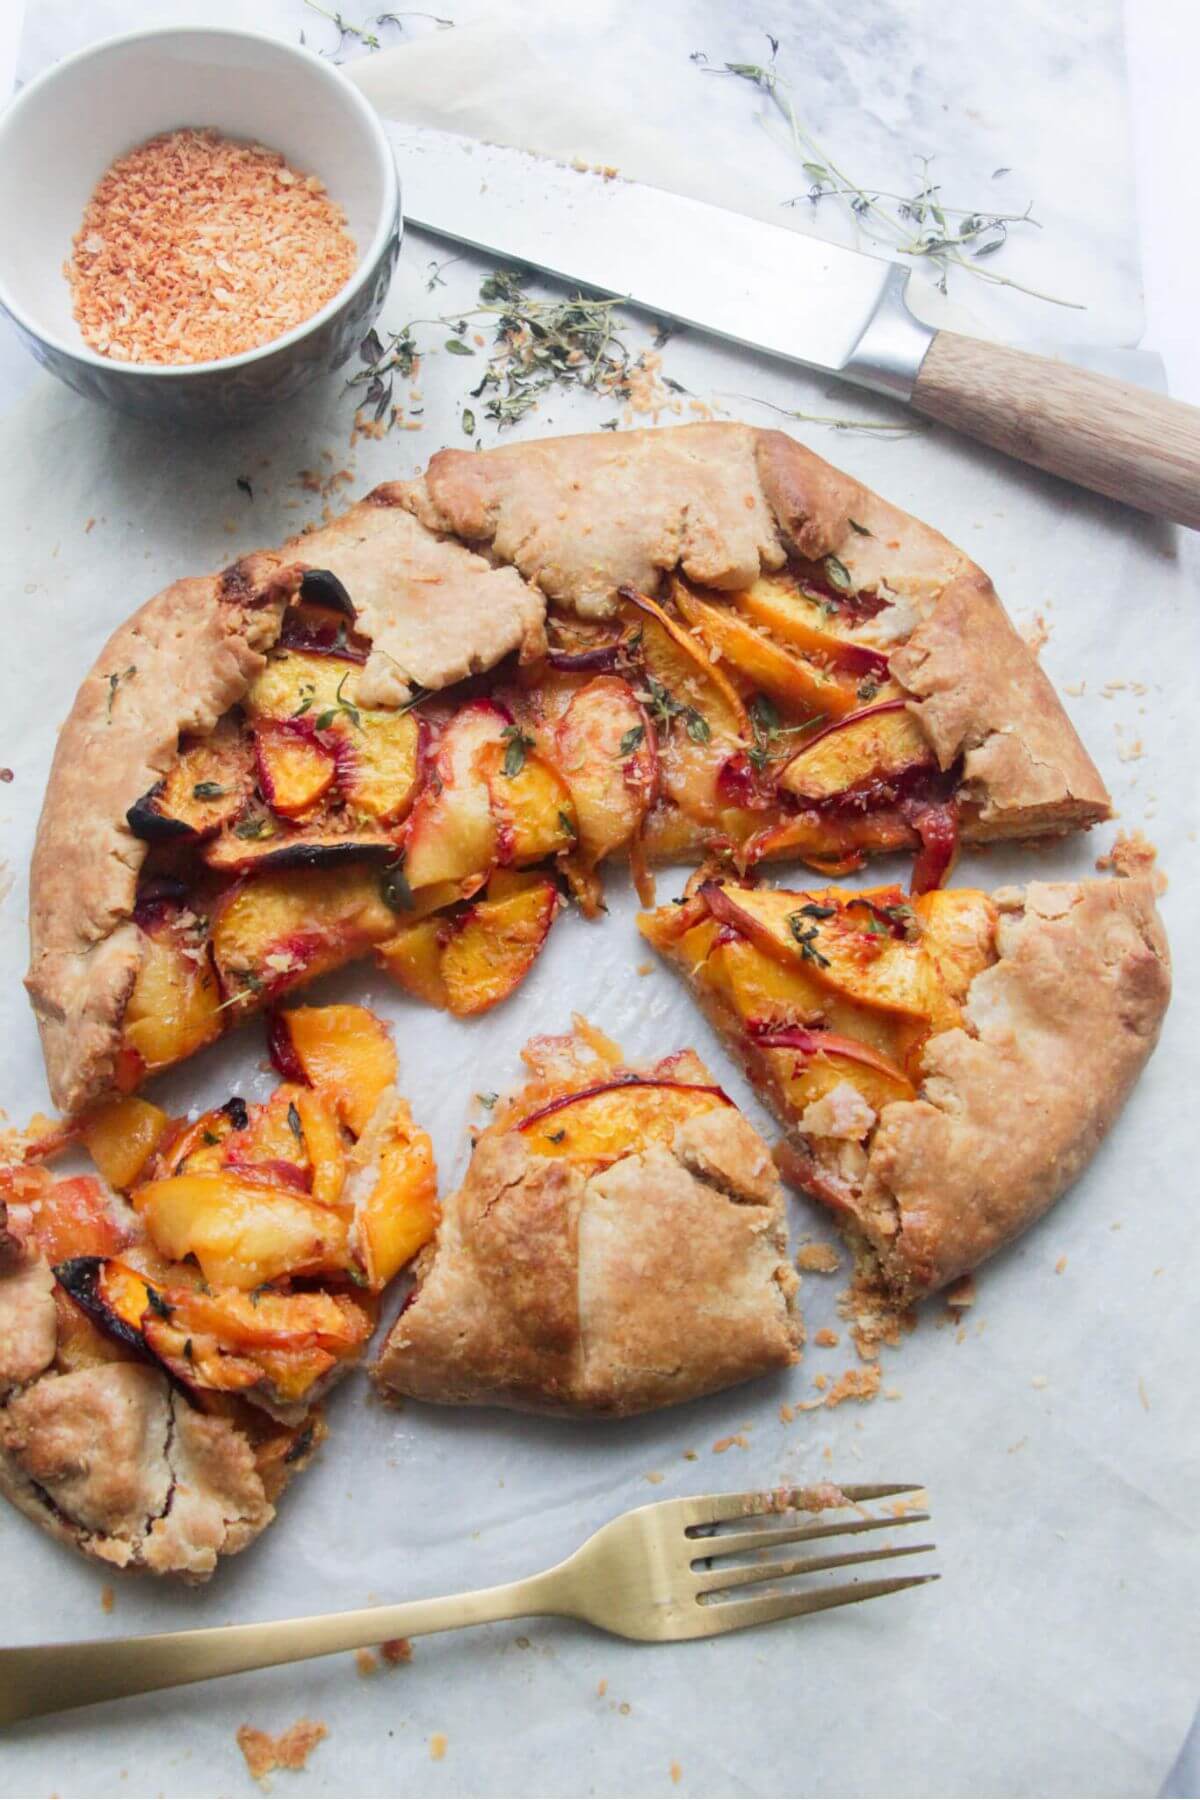 Peach almond galette cut into 3 slices with a fork and knife in the background.